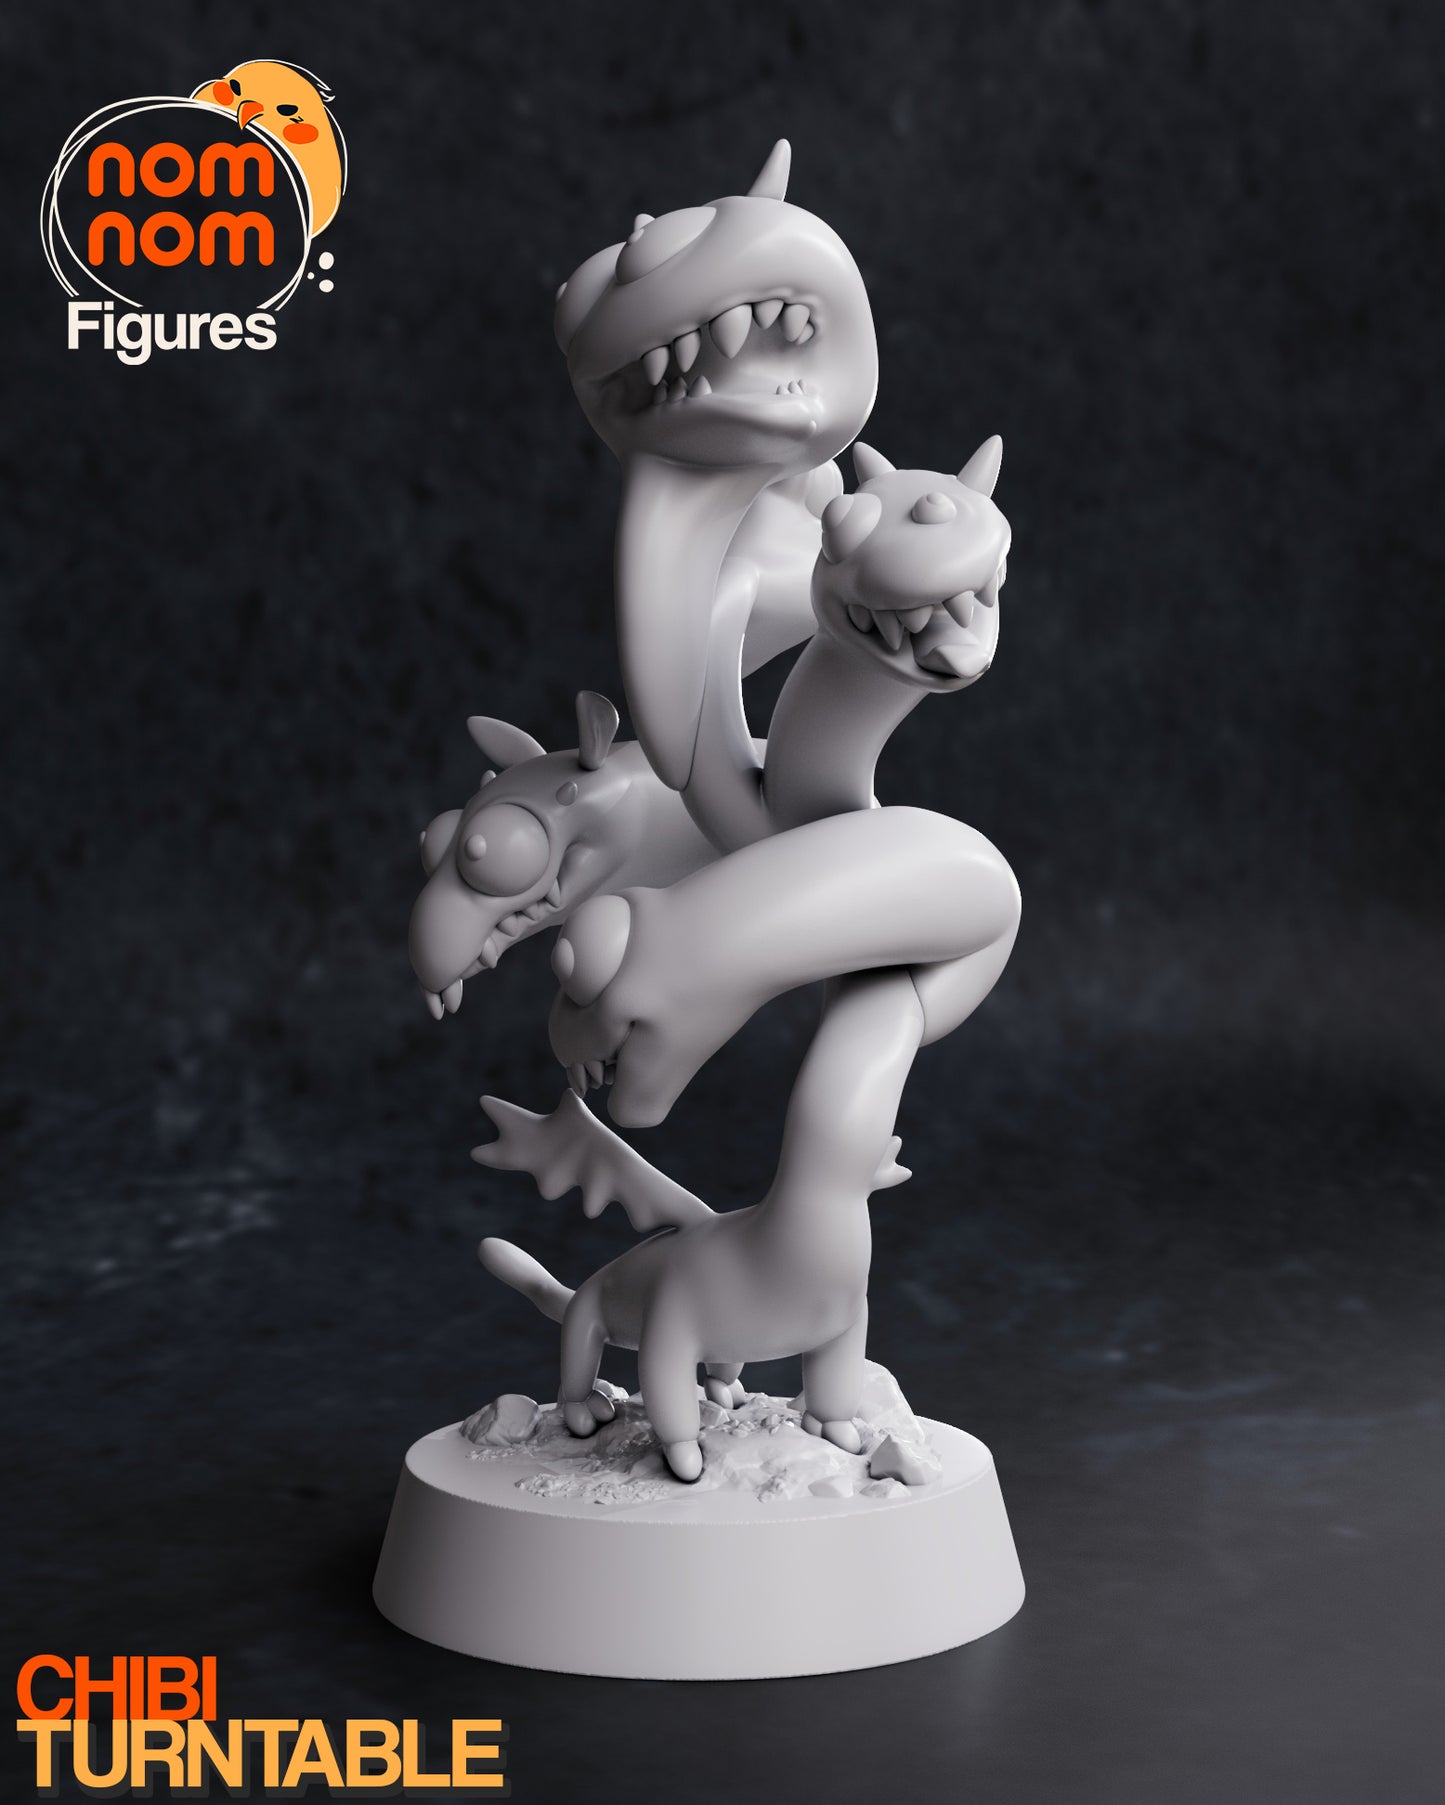 Silly Queen Mother of Dragons | Resin Garage Kit Sculpture Anime Video Game Fan Art Statue | Nomnom Figures - Tattles Told 3D